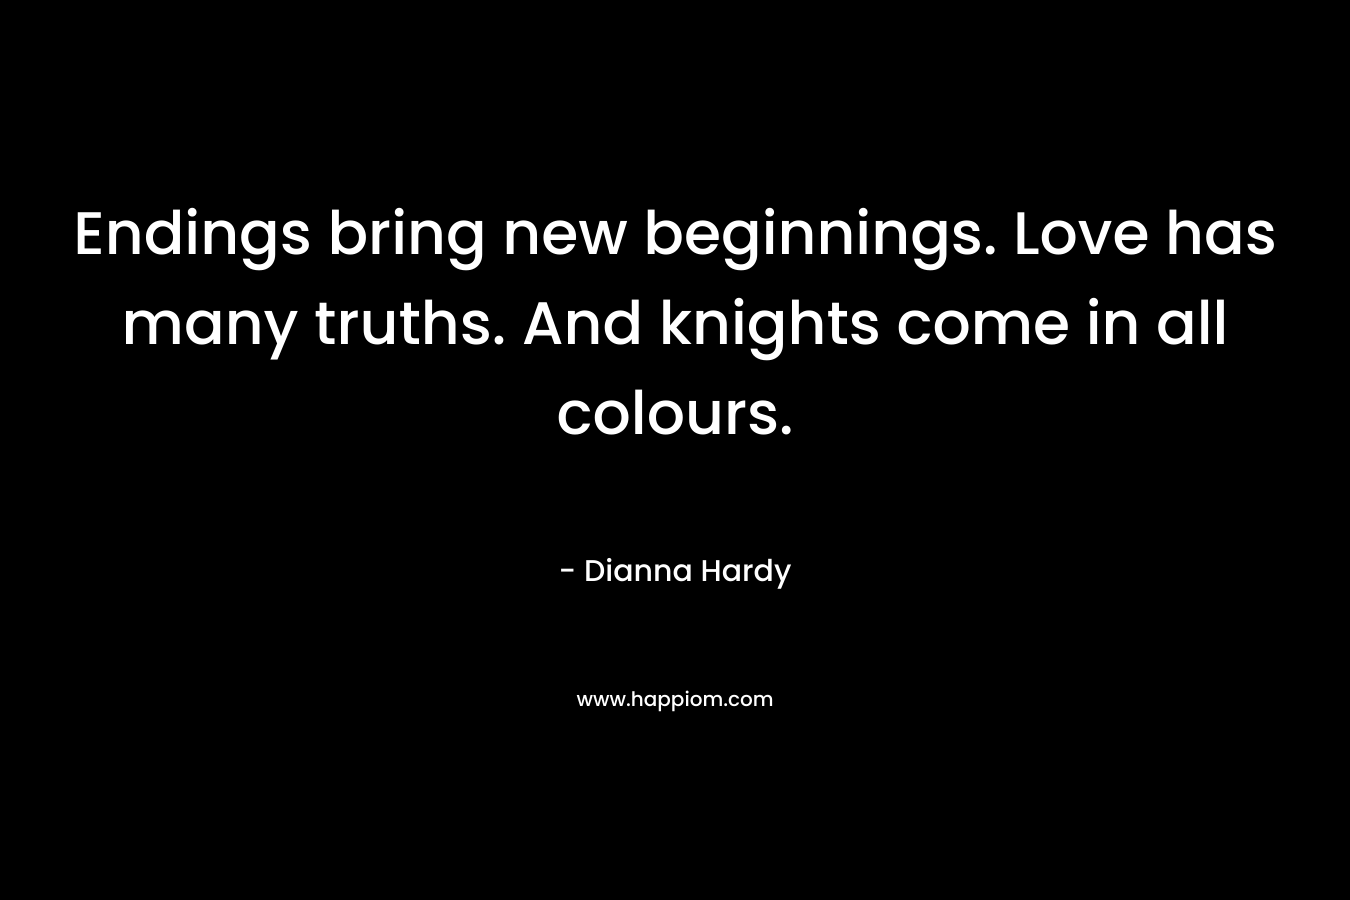 Endings bring new beginnings. Love has many truths. And knights come in all colours. – Dianna Hardy